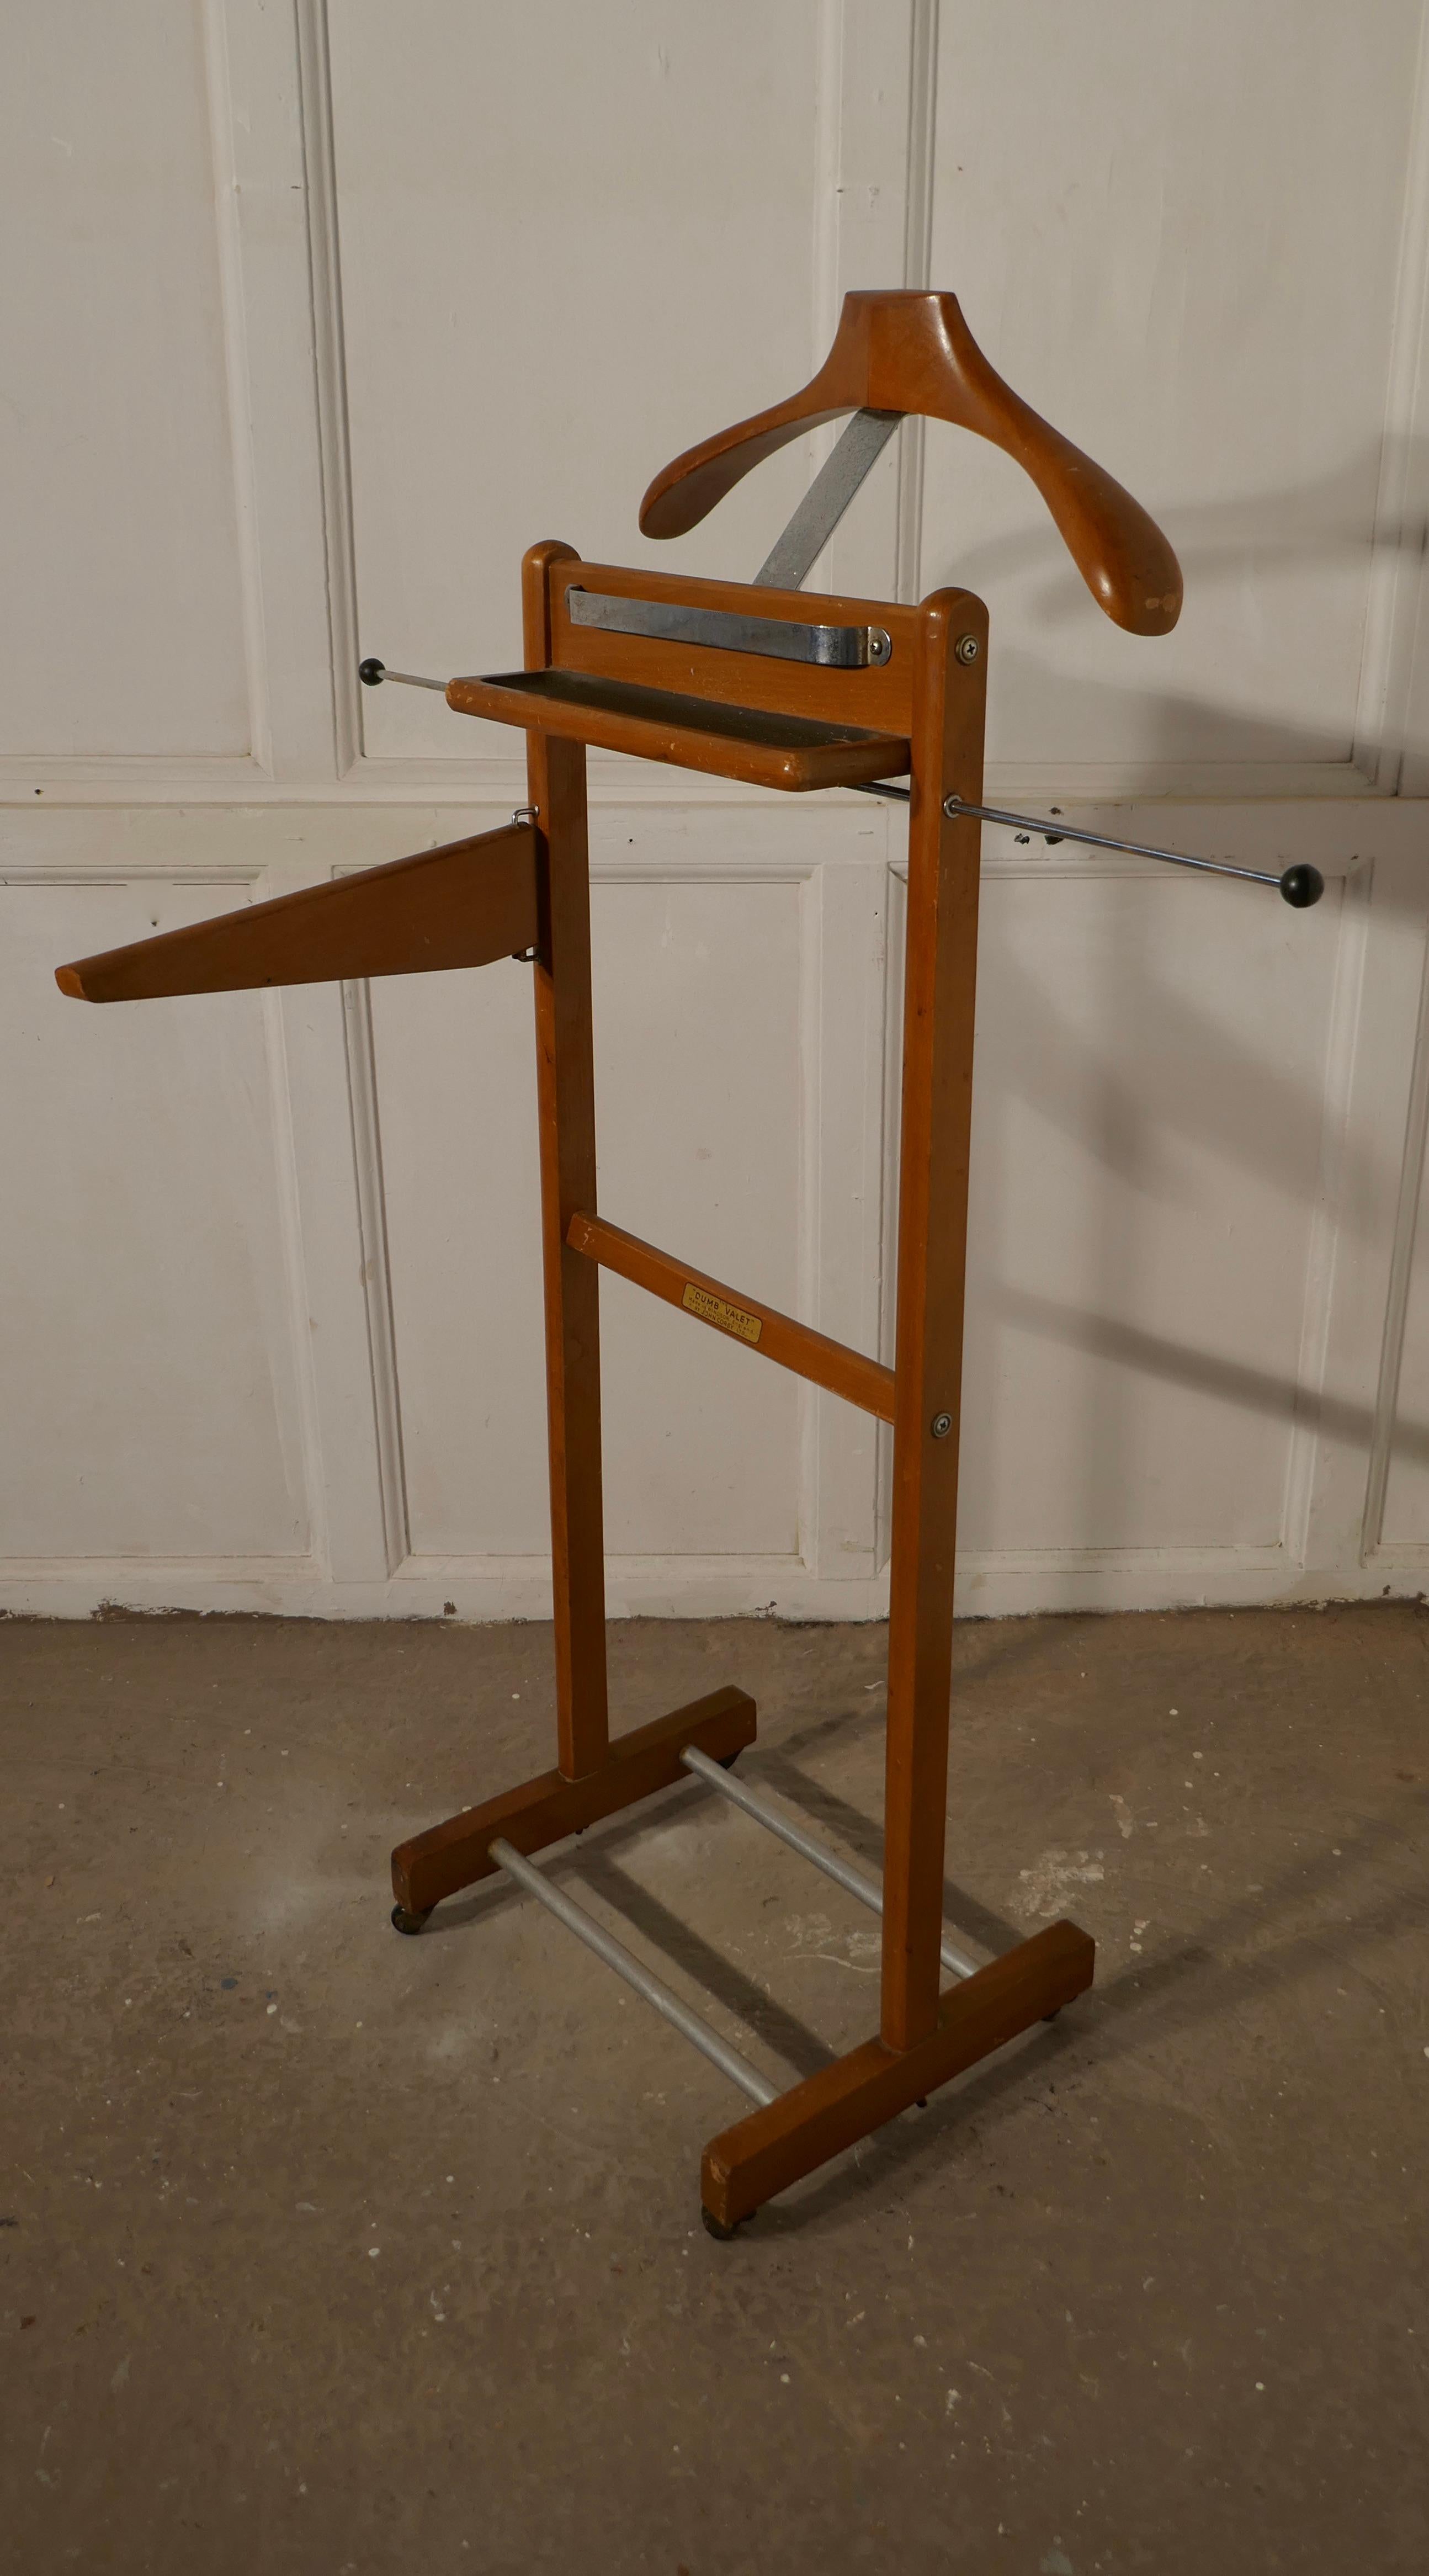 Art Deco Gentleman’s suit hanger or nightstand, the Versatile valet, by Corby of Windsor

A very useful piece, the hanger or clothes stand is made in golden oak, it has a hanger and will accommodate not only jacket it also has a rails for